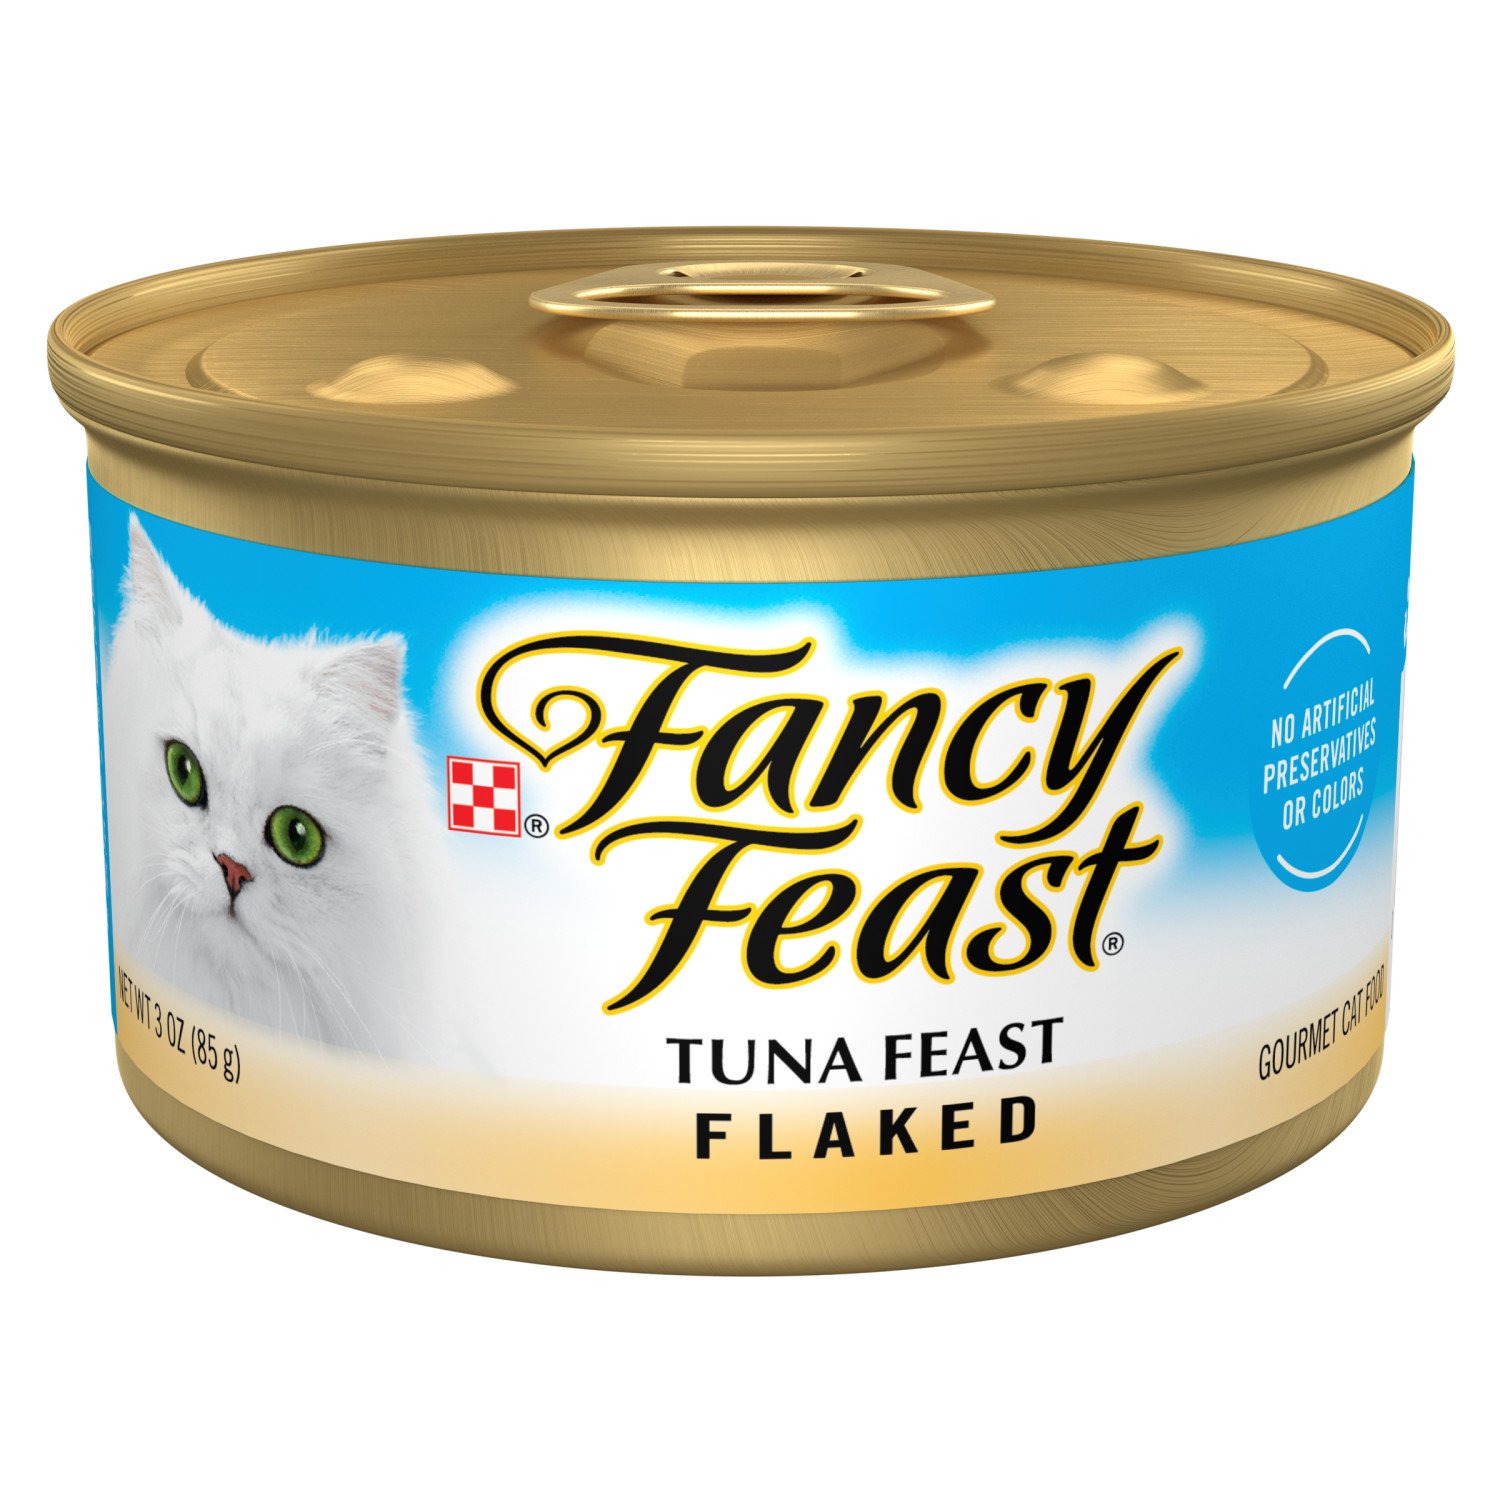 Purina Fancy Feast Flaked Tuna Feast Gourmet Cat Food Shop Cats at HEB